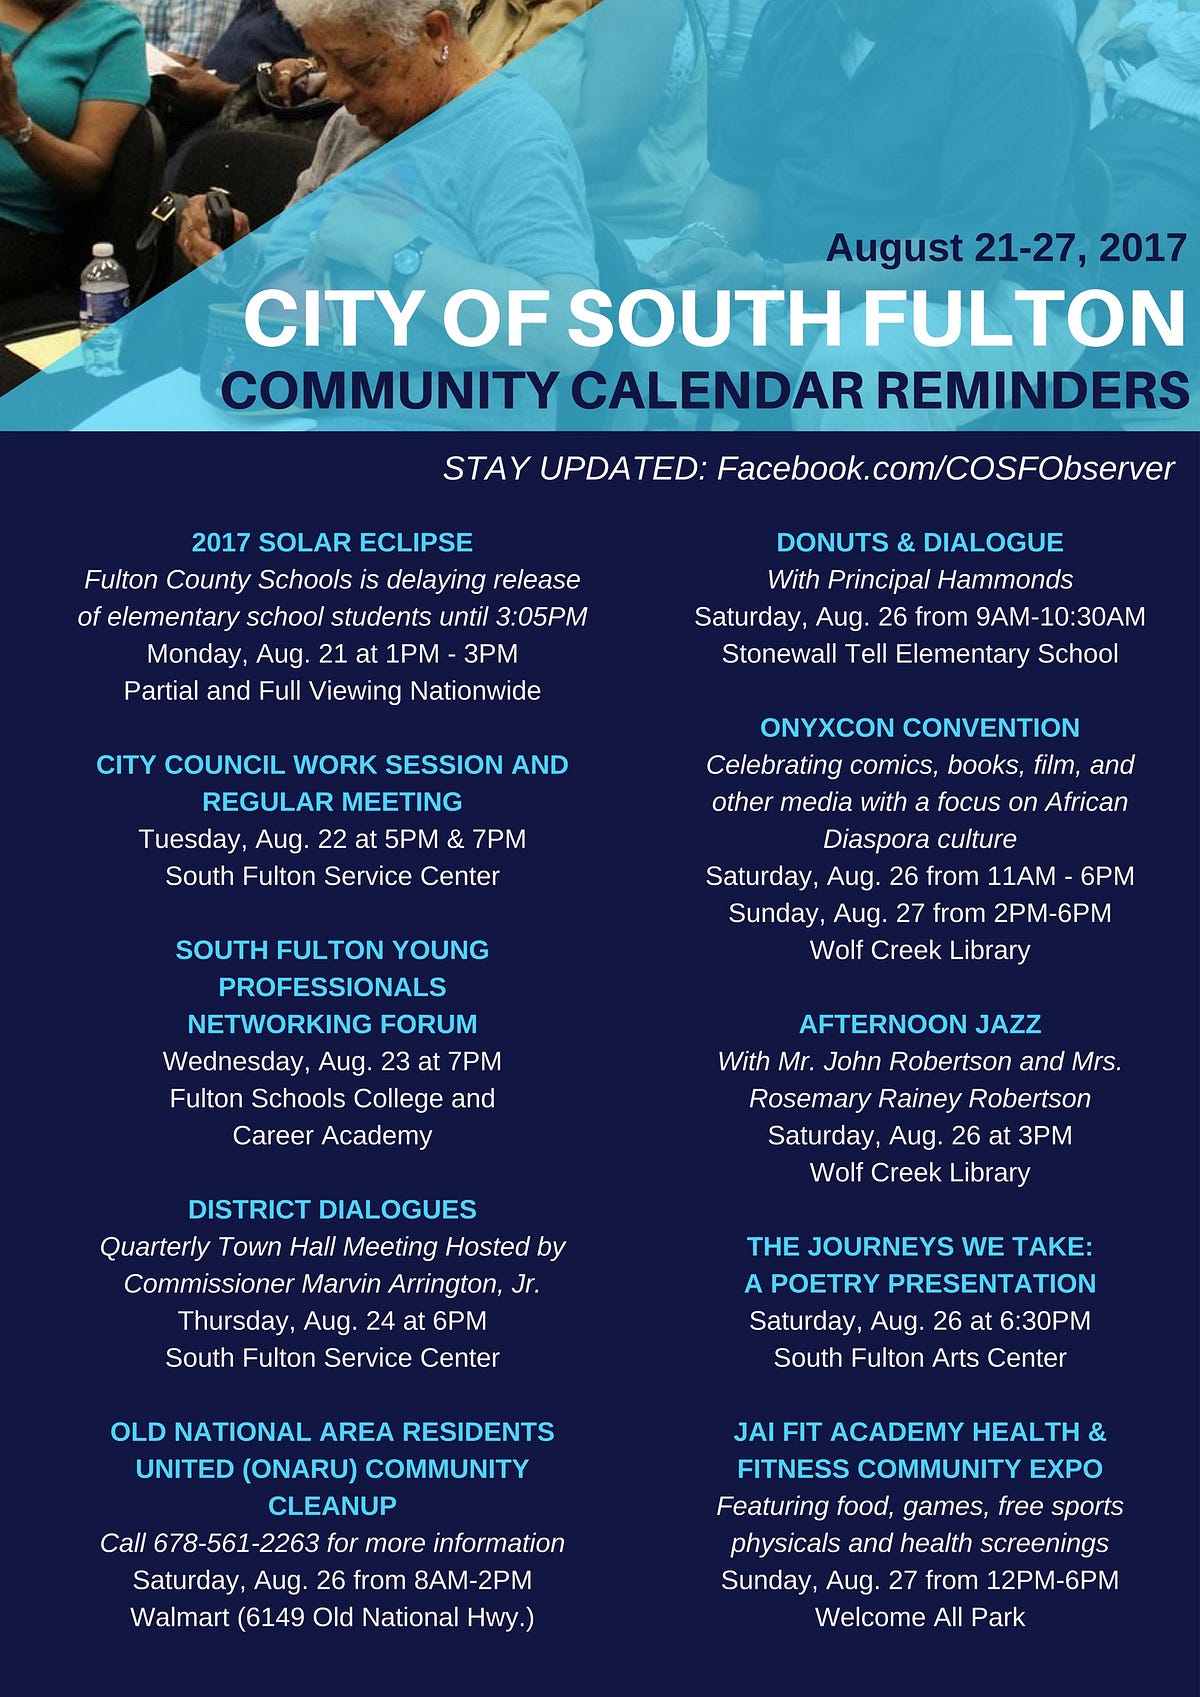 City of South Fulton Community Calendar Week of August 21 by CoSF